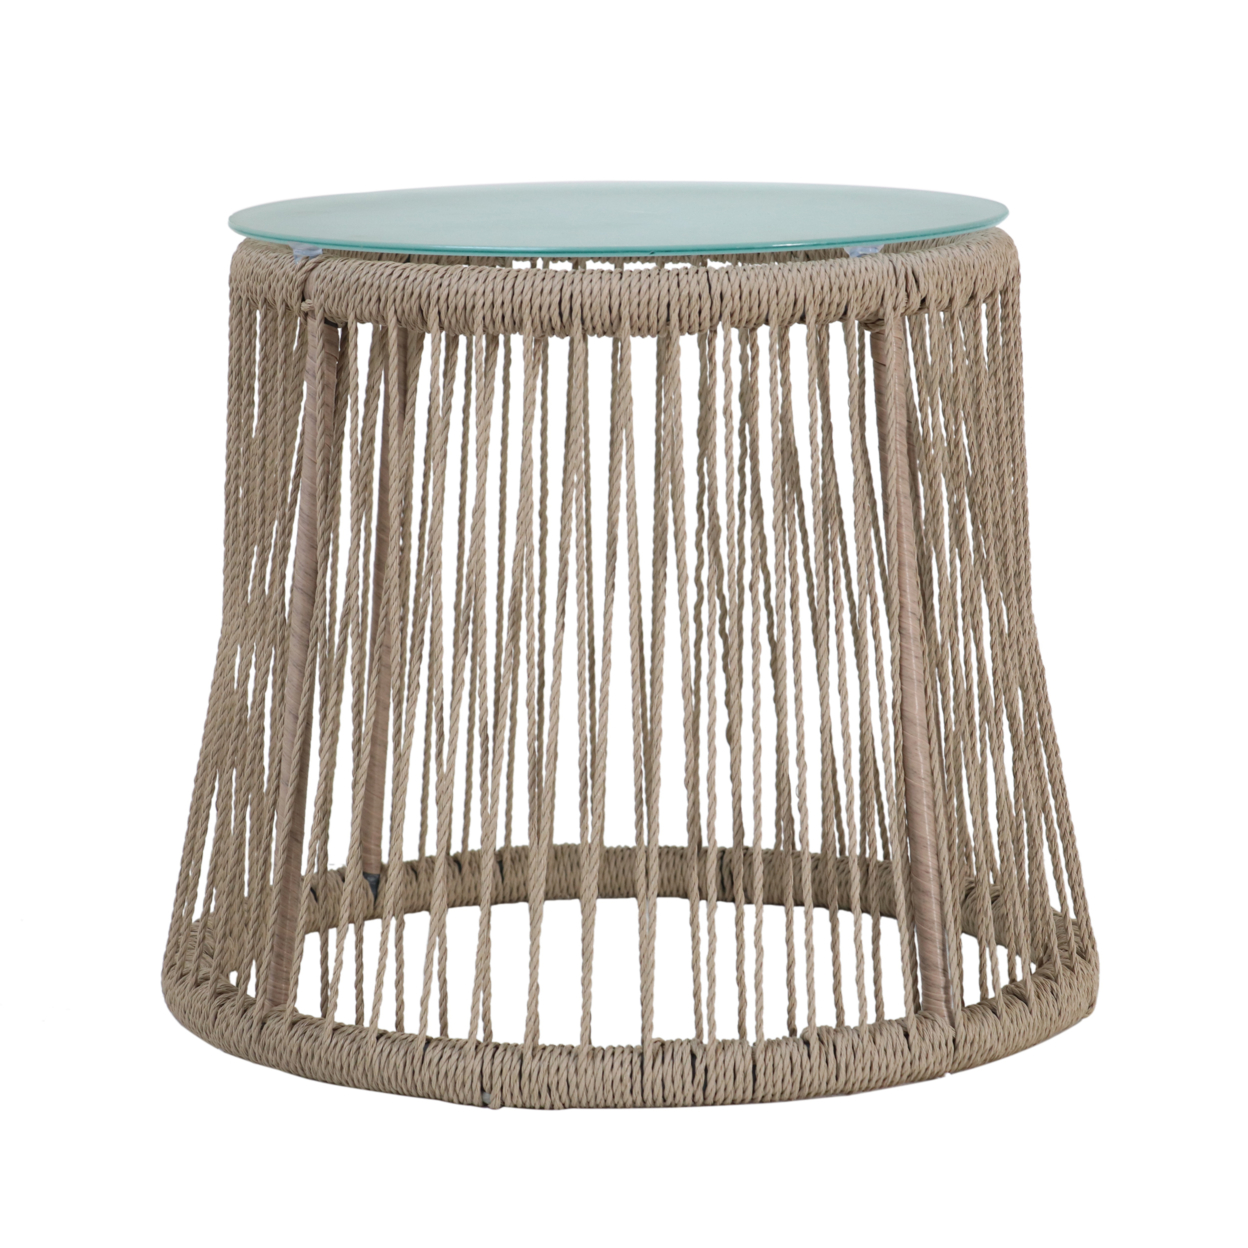 Karen Outdoor Side Table, Steel And Rope, Tempered Glass Table Top, Boho - Gray